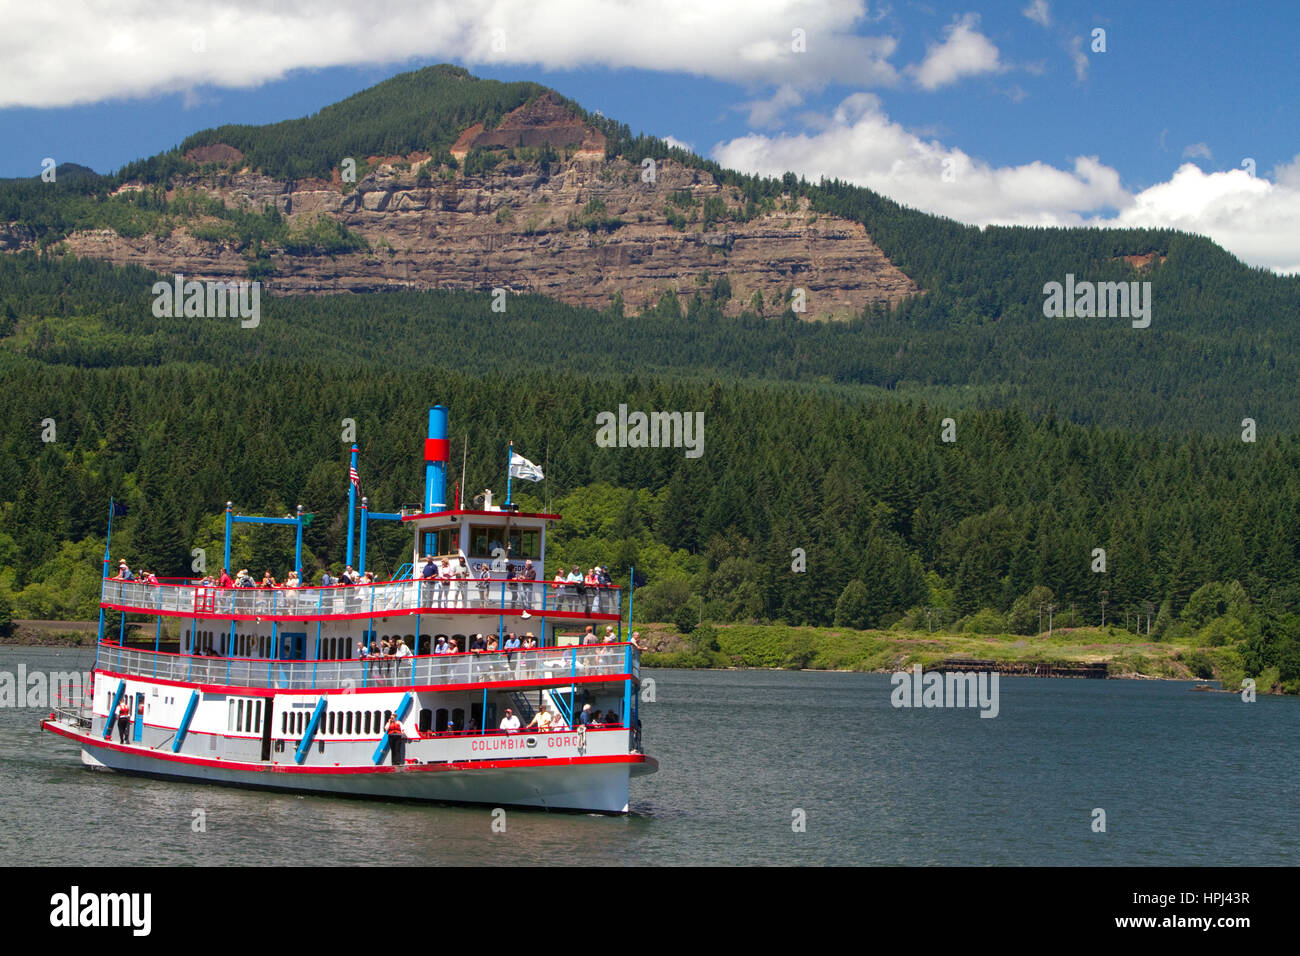 Sternwheeler Columbia Gorge giving a sightseeing cruise on the Columbia River at Cascade Locks, Oregon, USA. Stock Photo